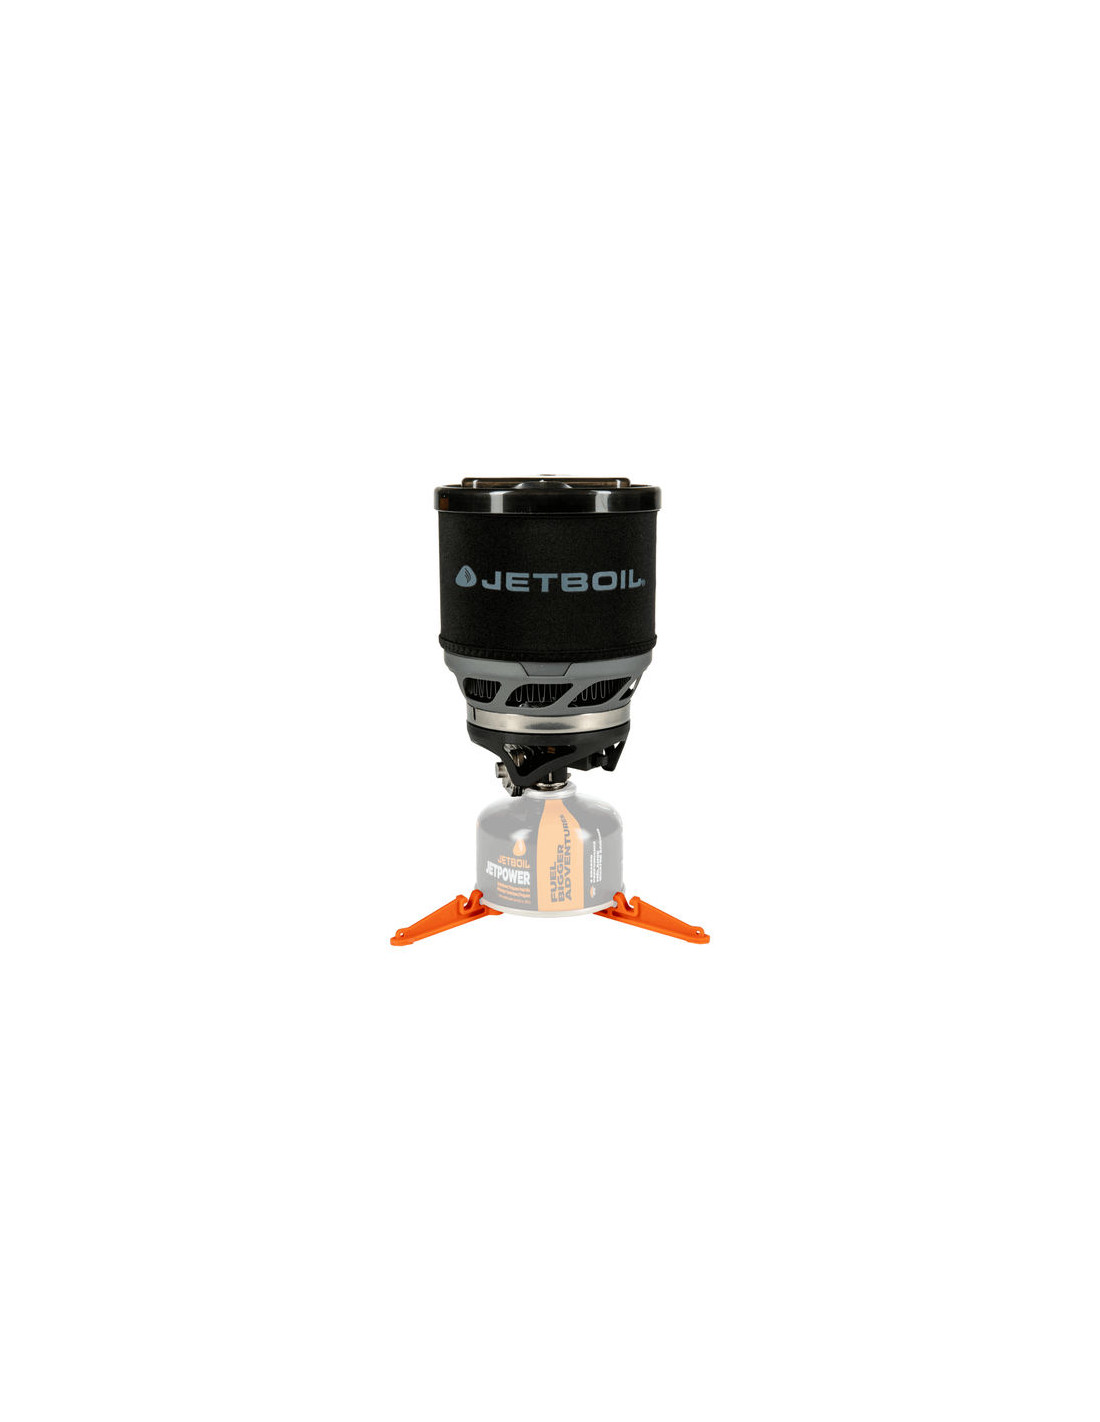 JETBOIL MINIMO  + POT SUPPORT 